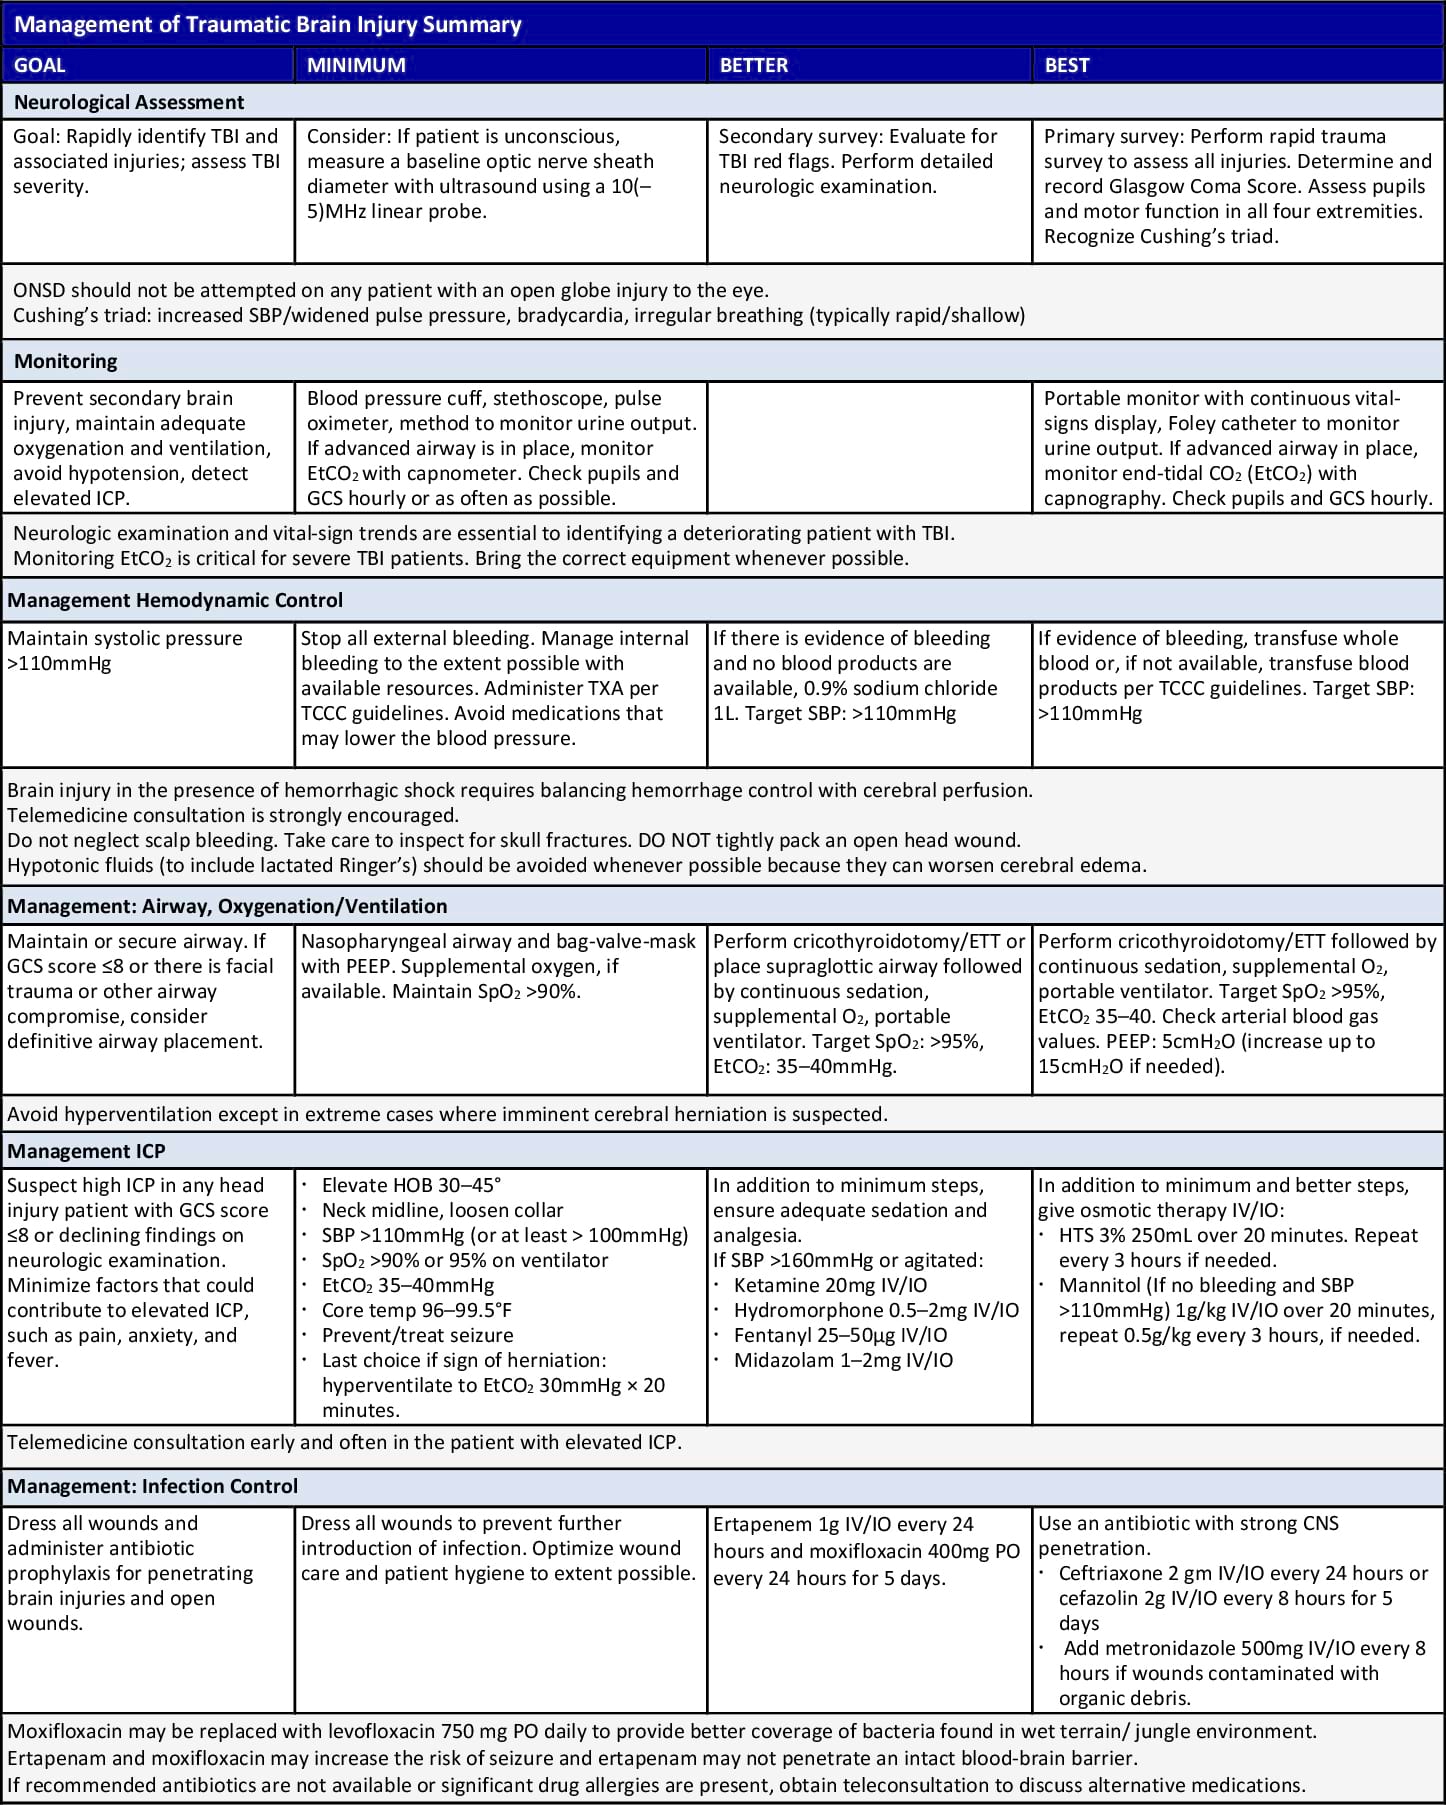 Management Of Traumatic Brain Injury Summary Table, Part 1